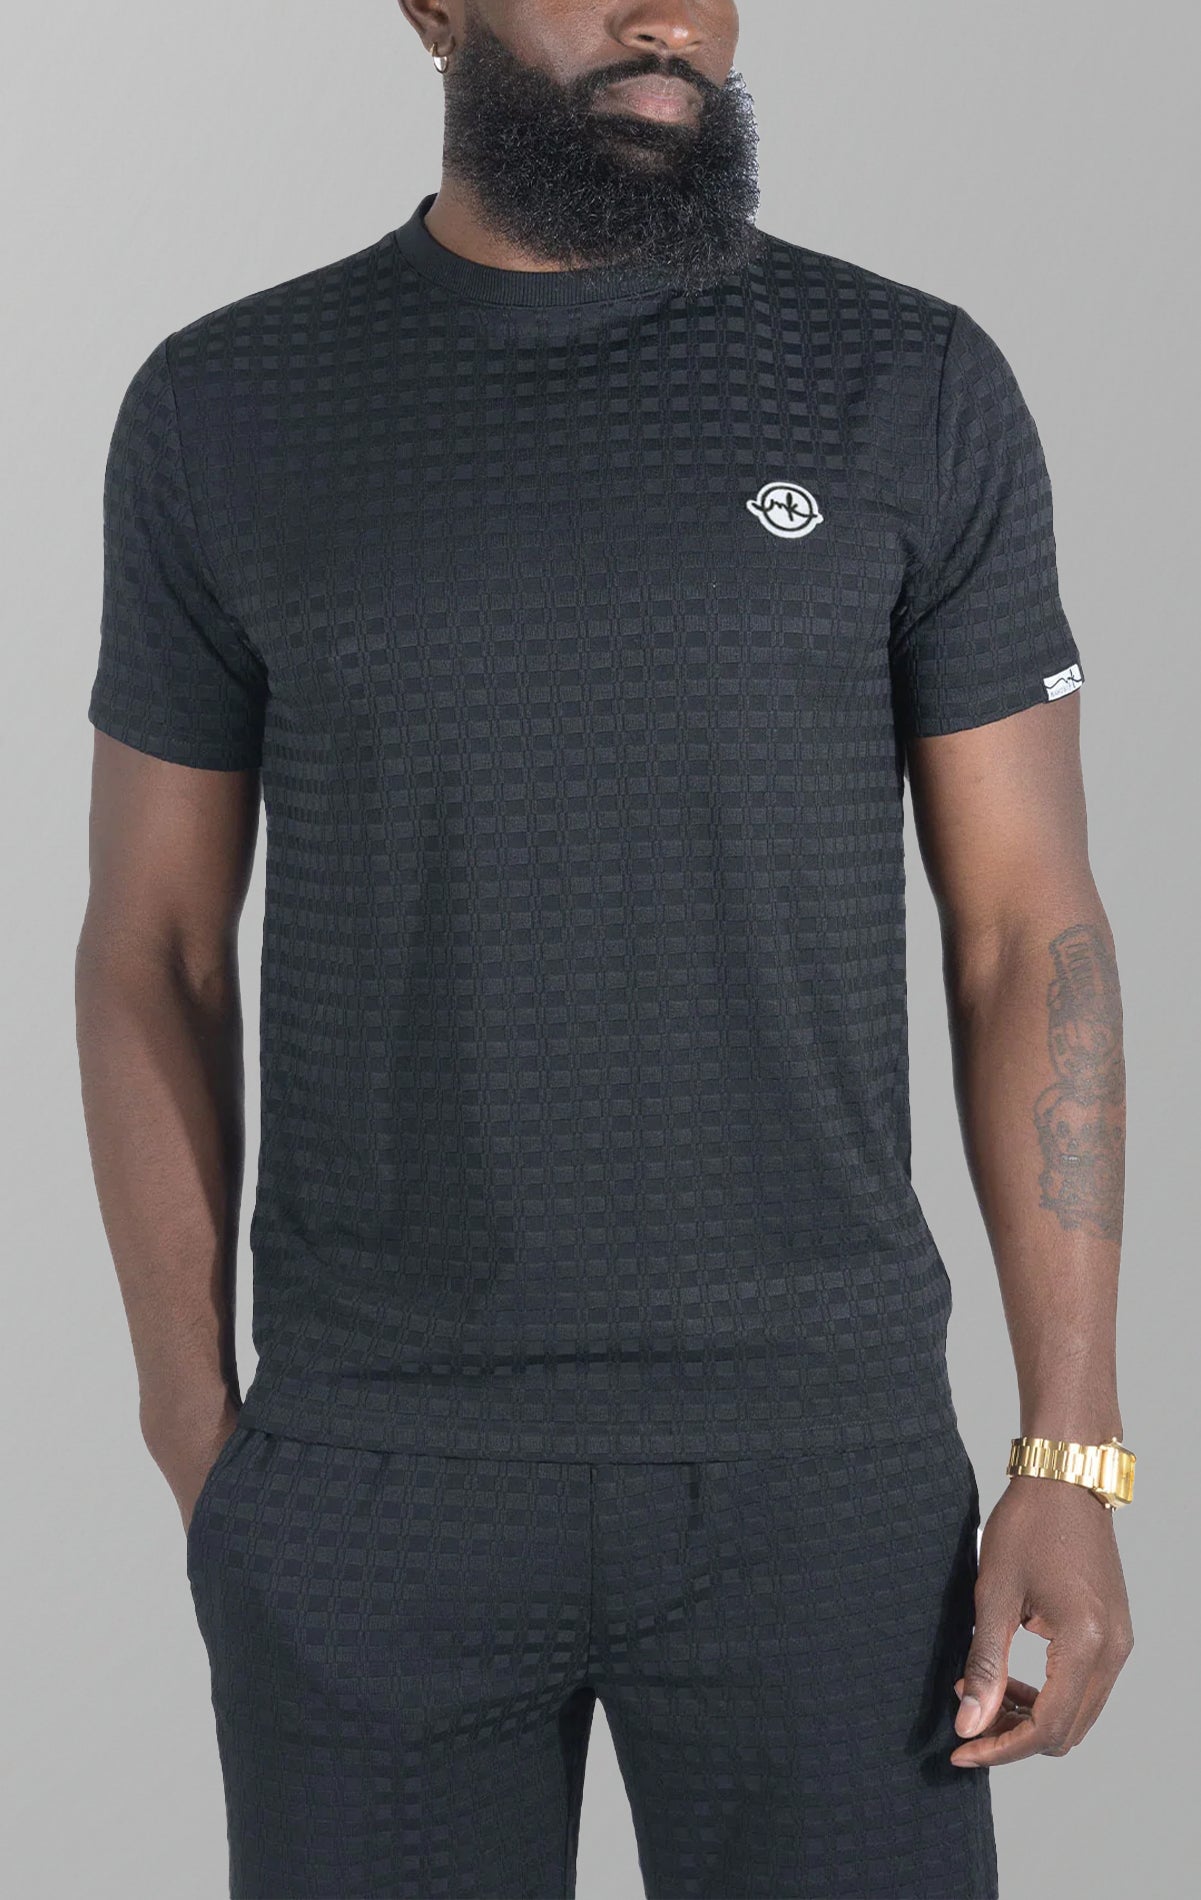 Black Modena Knit Tee. Made from a high-quality blend of 95% cotton and 5% spandex for a soft and comfortable feel. Features a unique embossed jacquard fabric with colored blocking for a textured and stylish look.  This tee is pre-shrunk and true to size.